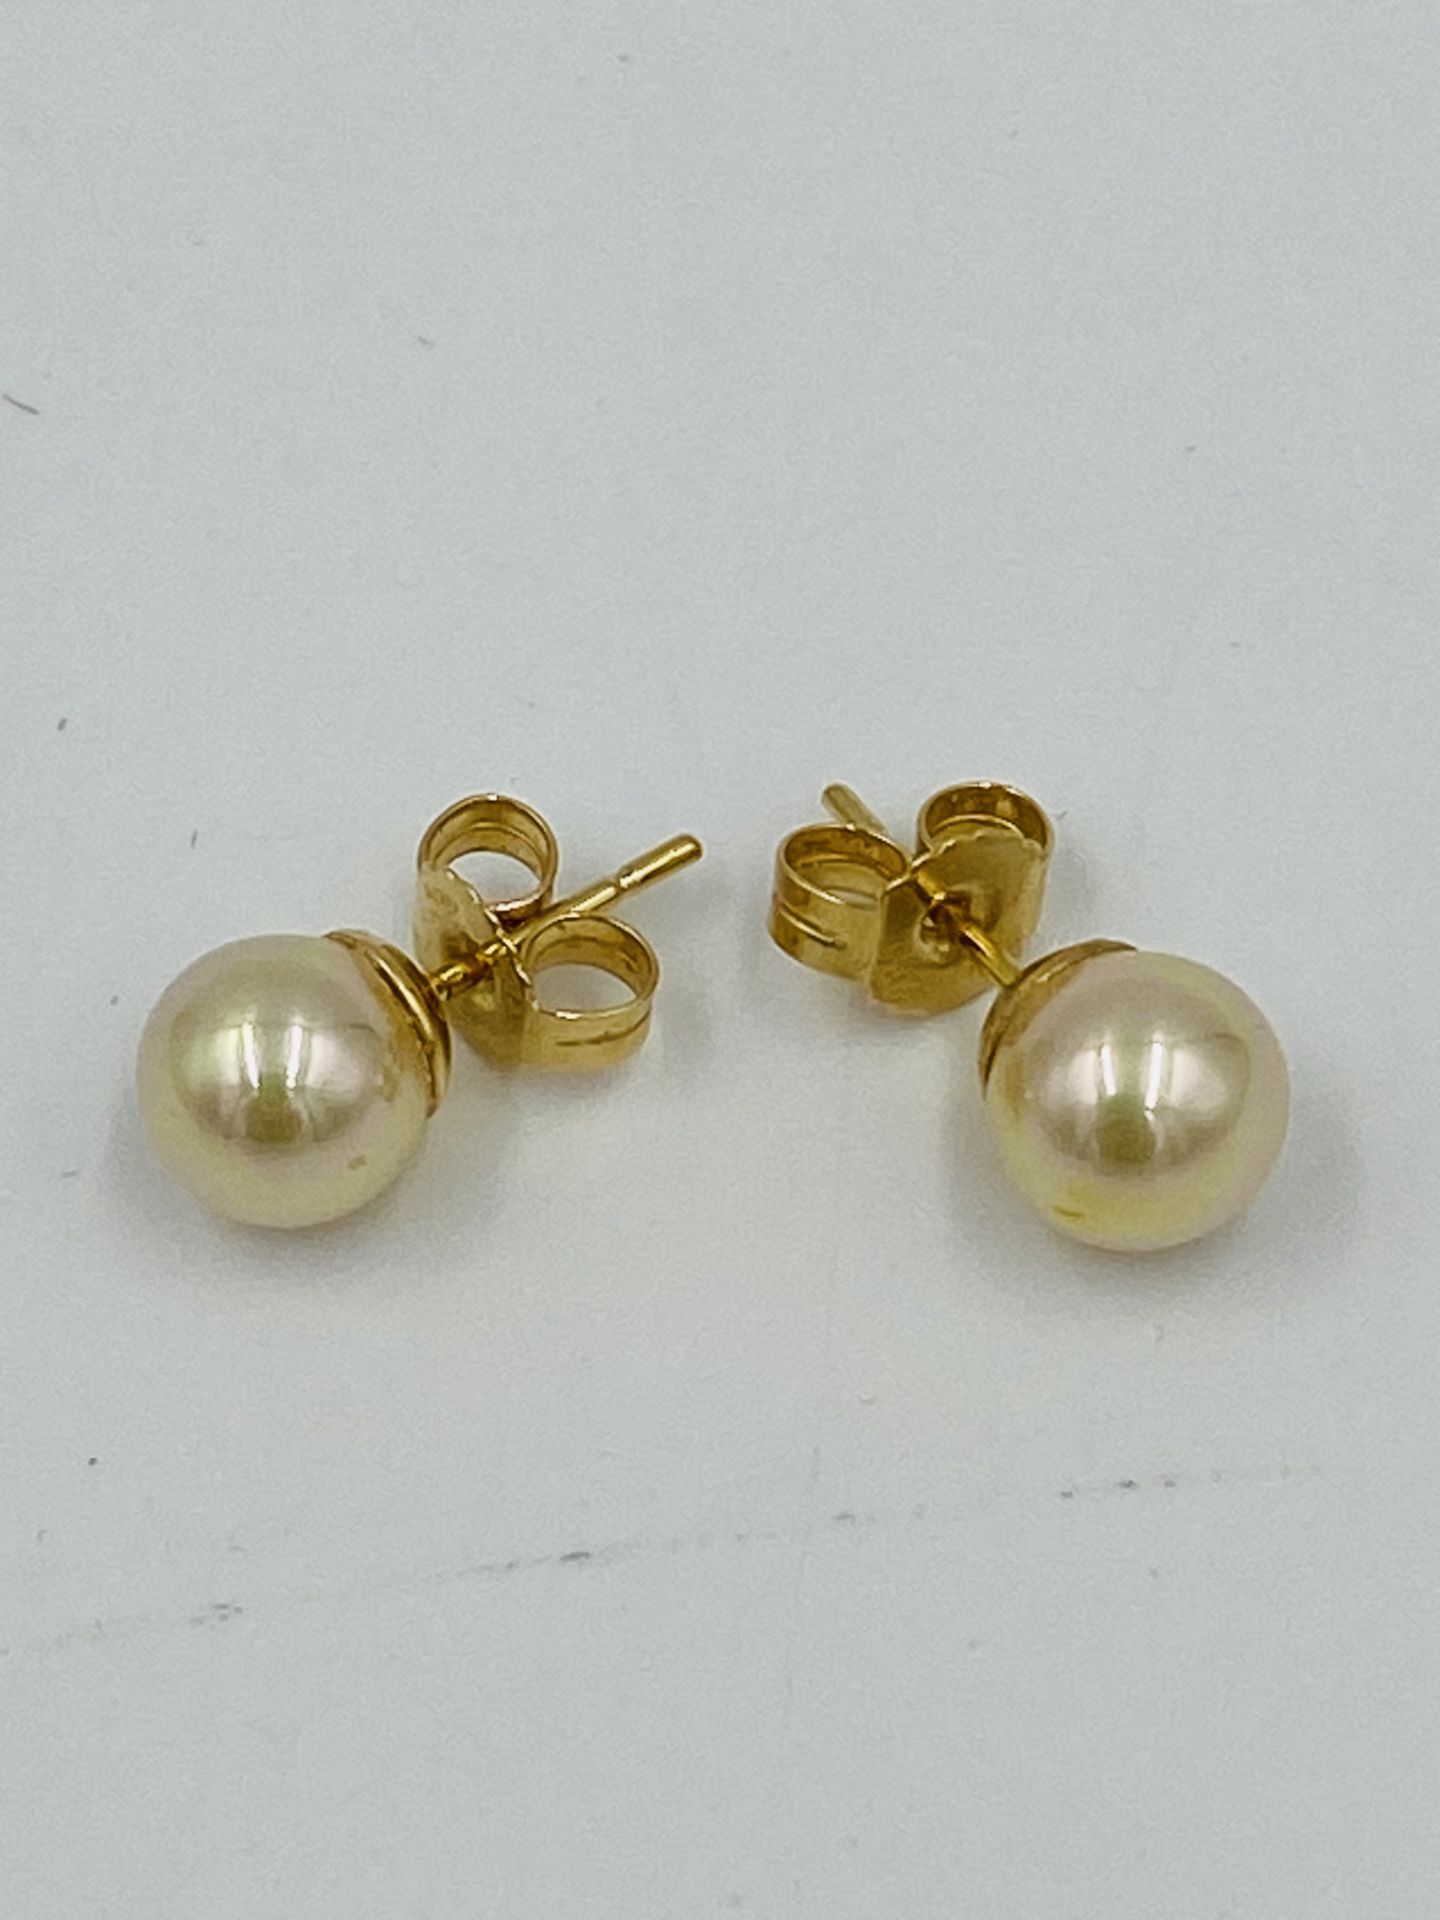 Pair of 18ct gold earrings set with a pearl - Image 2 of 4